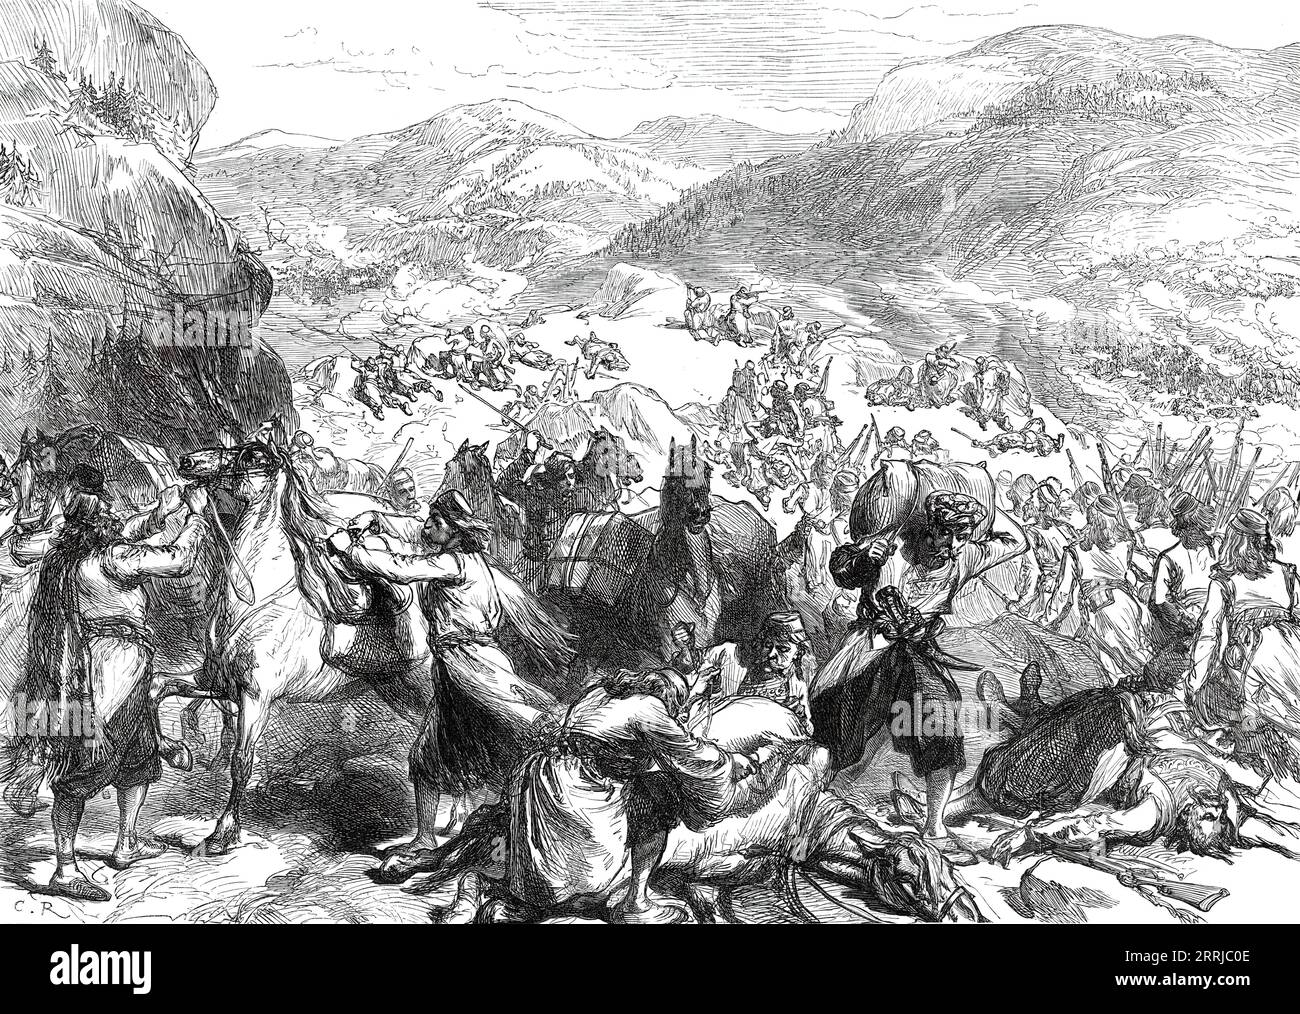 The War in the Herzegovina: insurgents surprising a Turkish convoy, from a sketch by our special artist, 1877. 'It is considered worthy of remark that the insurgent bands were able to hold their position in a level country, and upon the road which was absolutely necessary to the existence of the Turkish army. They held it for two weeks against that army, which had gone into winter quarters within ten miles of the insurgent positions. It was necessary to concentrate all the available Turkish forces in the province to drive 2000 insurgents off that road - ill-provided, ill-armed, ill-organised m Stock Photo